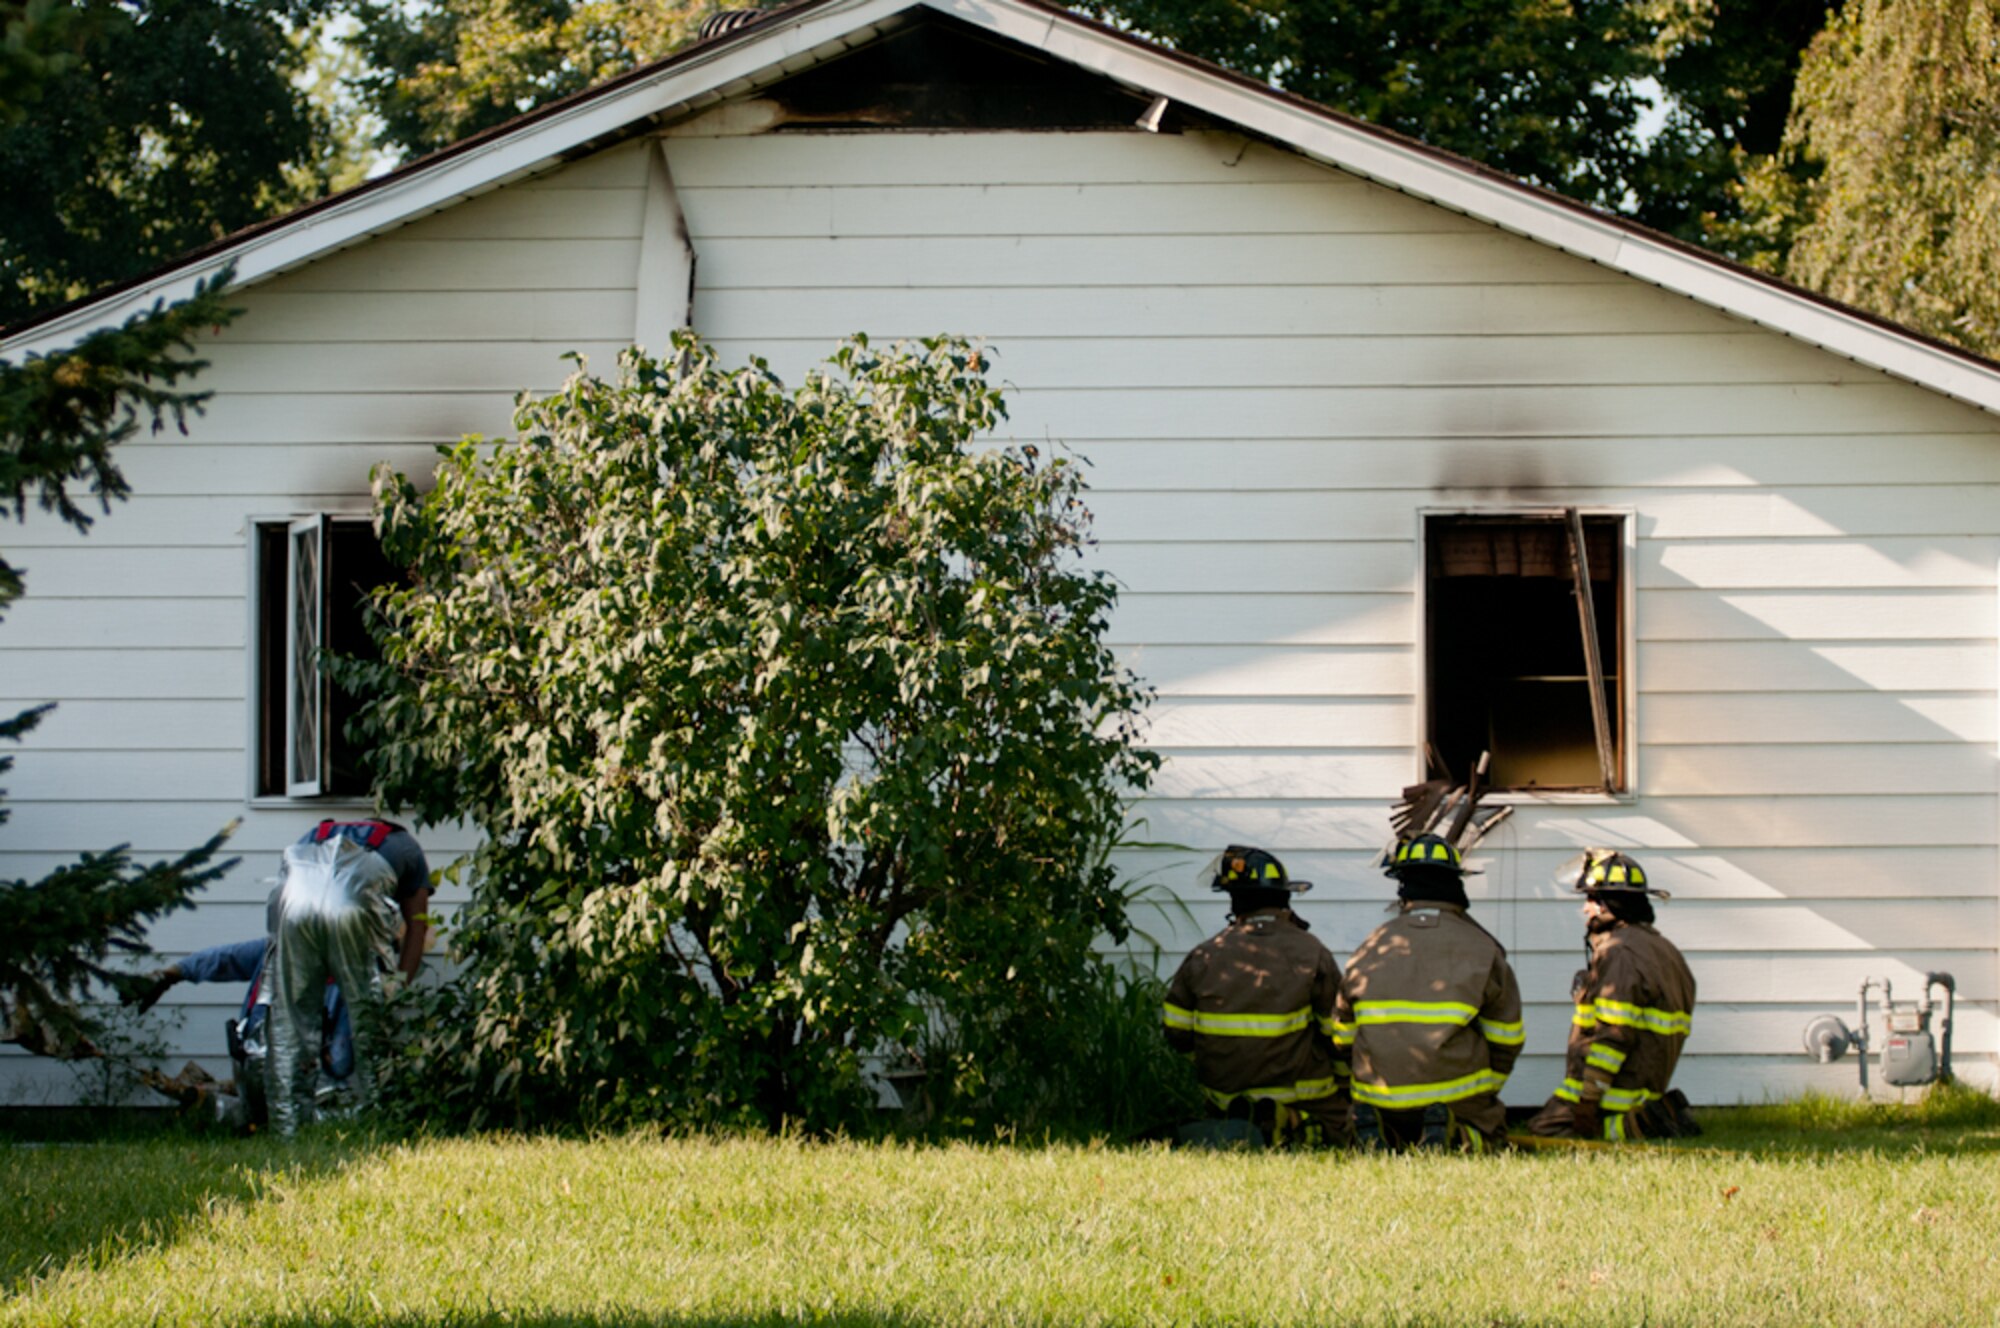 Airmen from the Missouri Air National Guard’s 139th Airlift Wing Fire Department respond to a house fire in Elwood, Ks., on August 25, 2011. The airmen were called to assist a mutual aid with the Doniphan County Volunteer Fire Department. (U.S. Air Force photo by Senior Airman Sheldon Thompson)